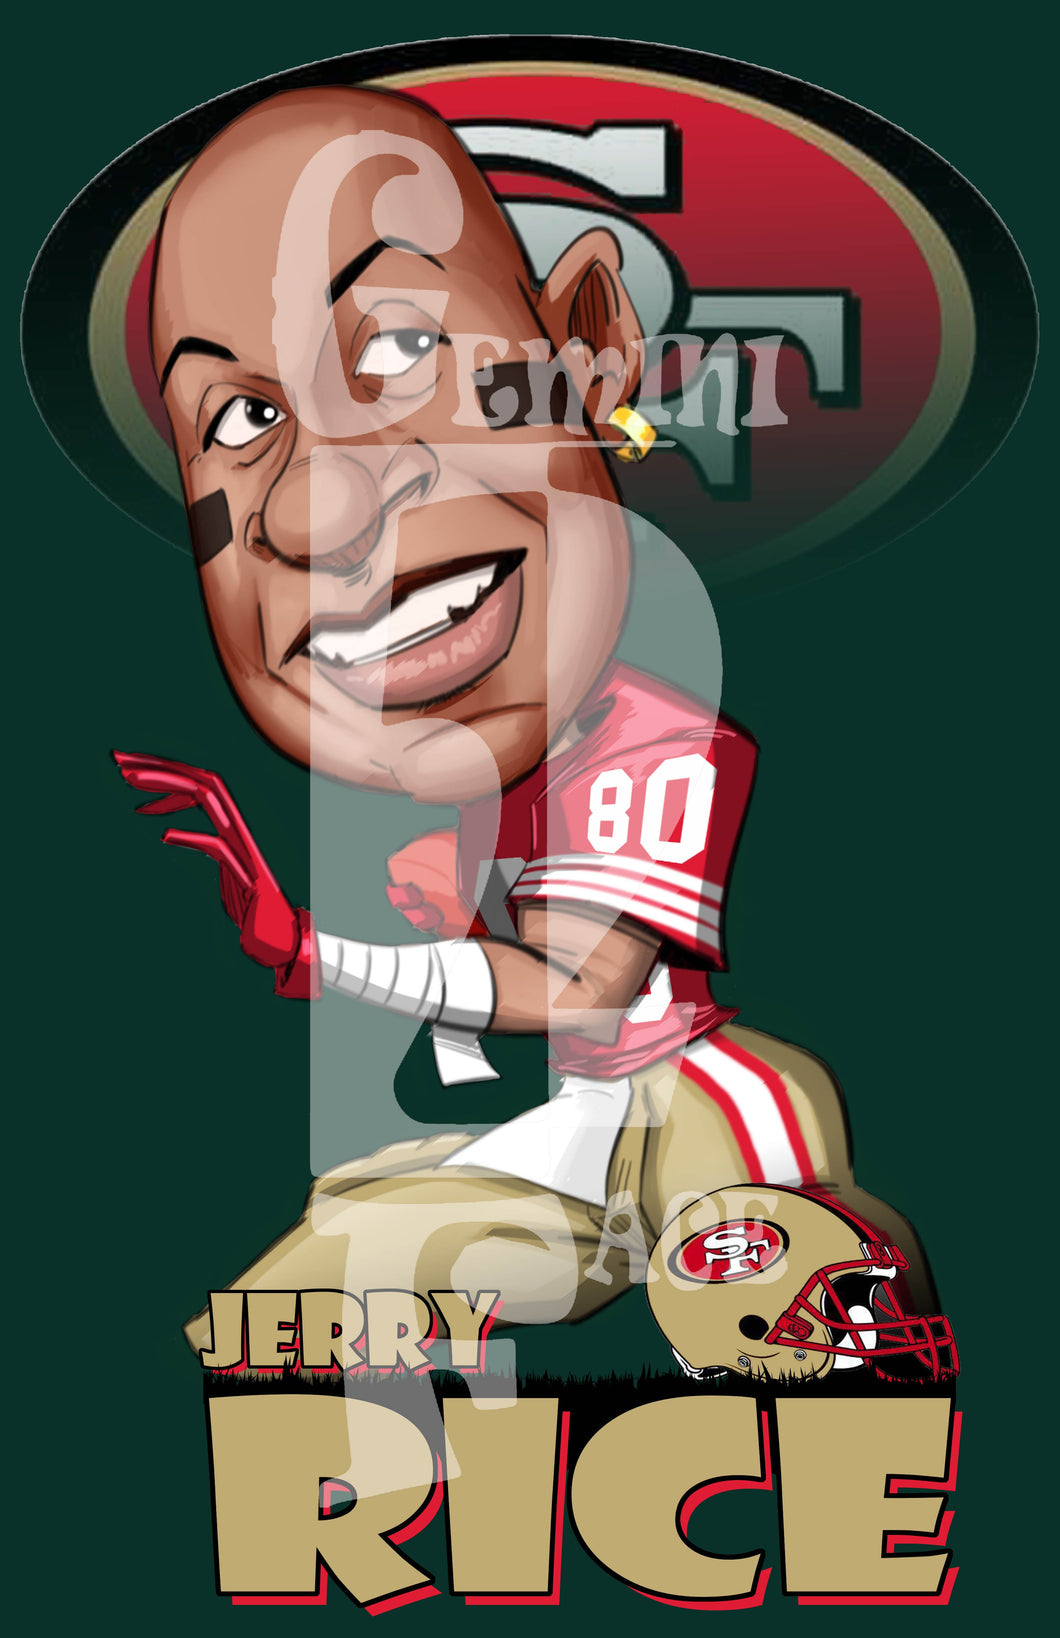 Jerry R w/o background (exclusive) PNG PNG File Gemini2face Art E-Store 